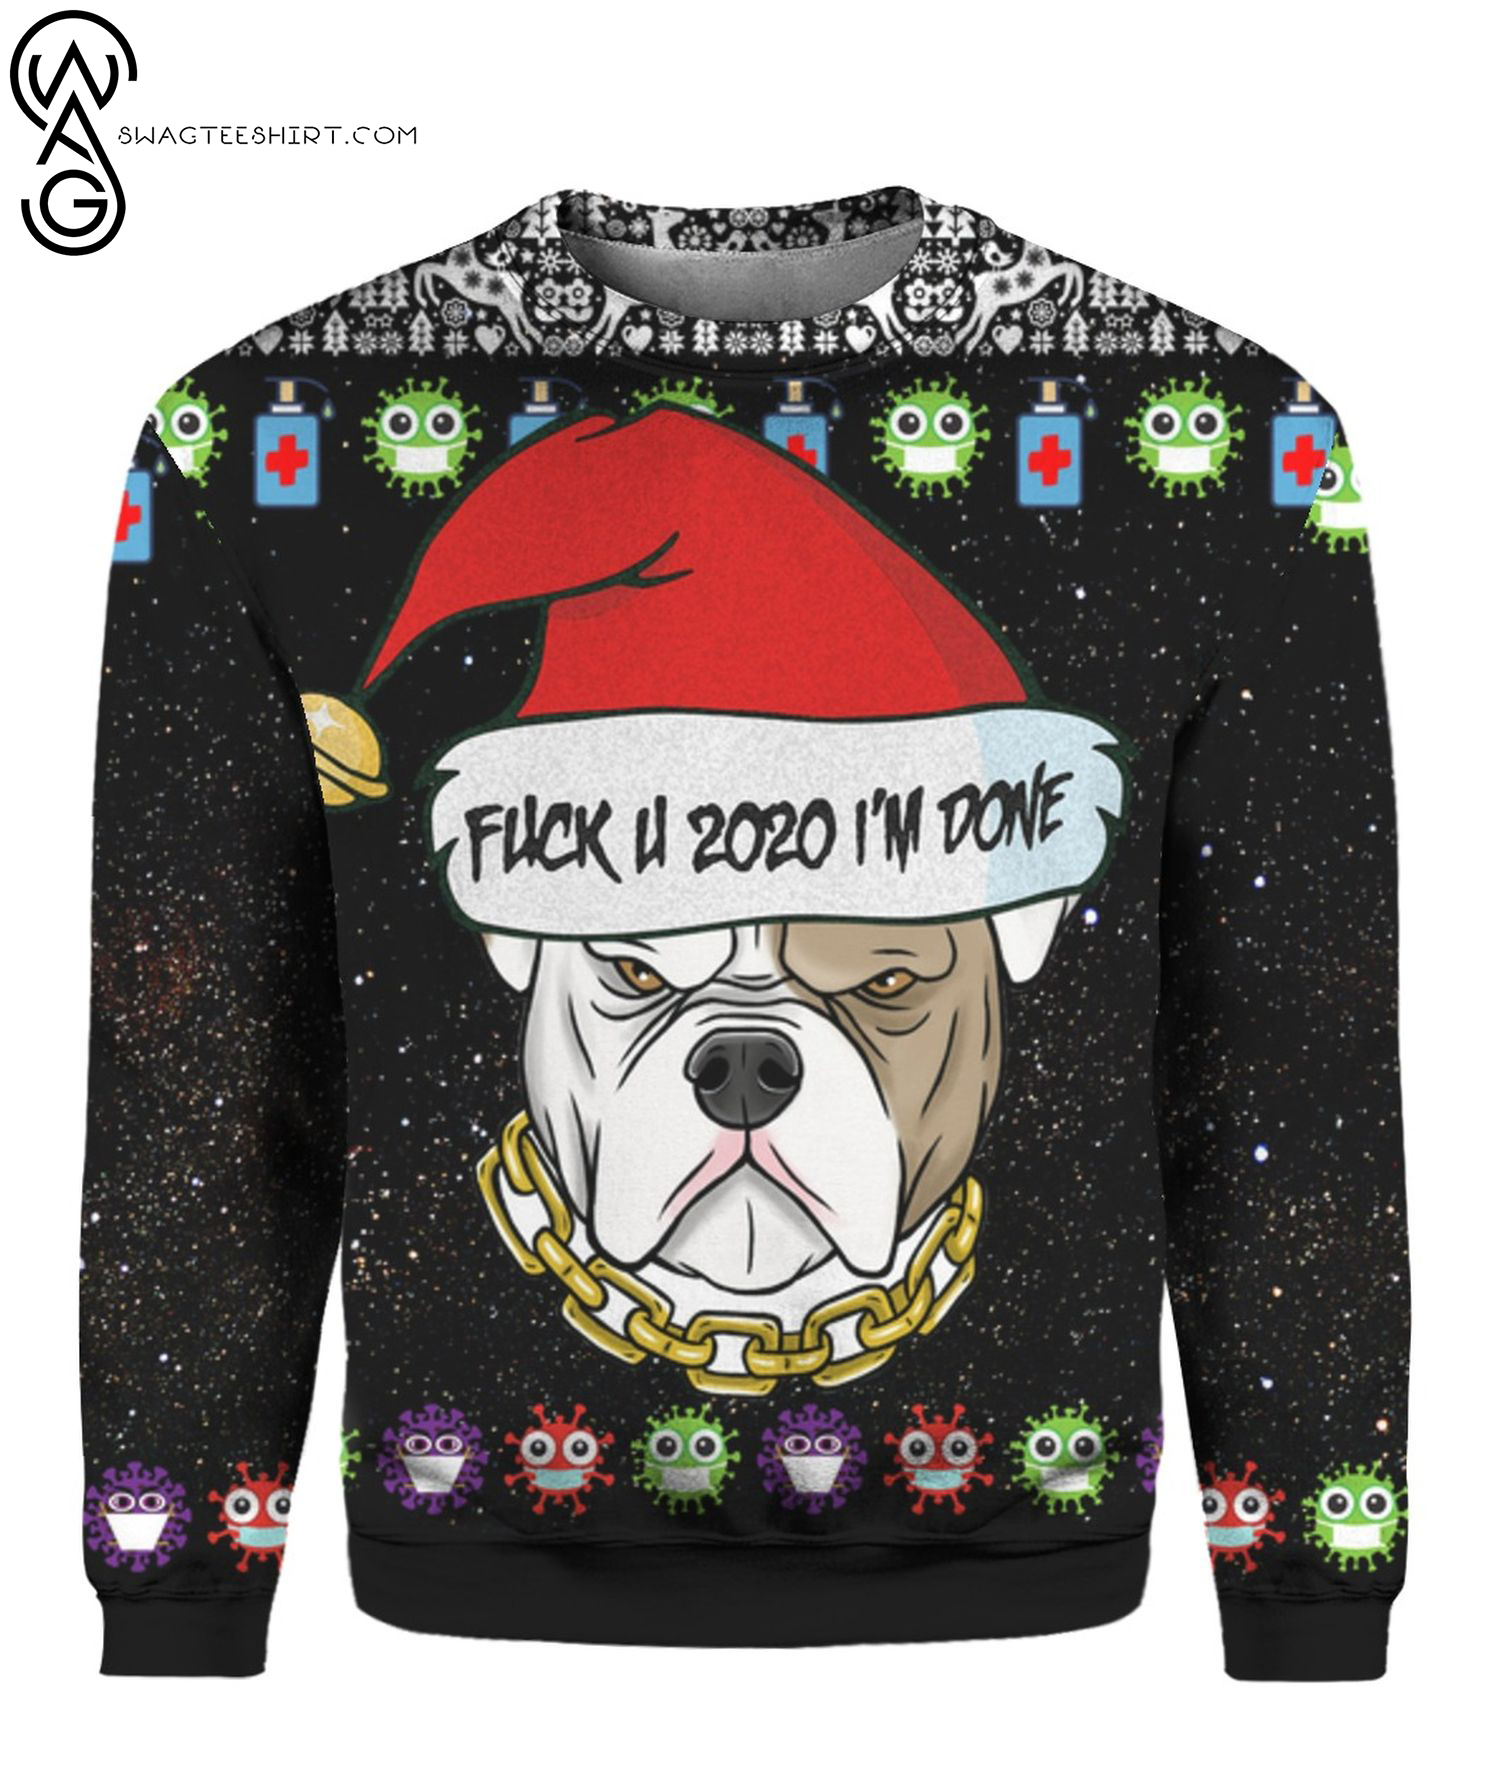 Bulldog And Fuck You 2020 I’m Done Full Print Ugly Christmas Sweater